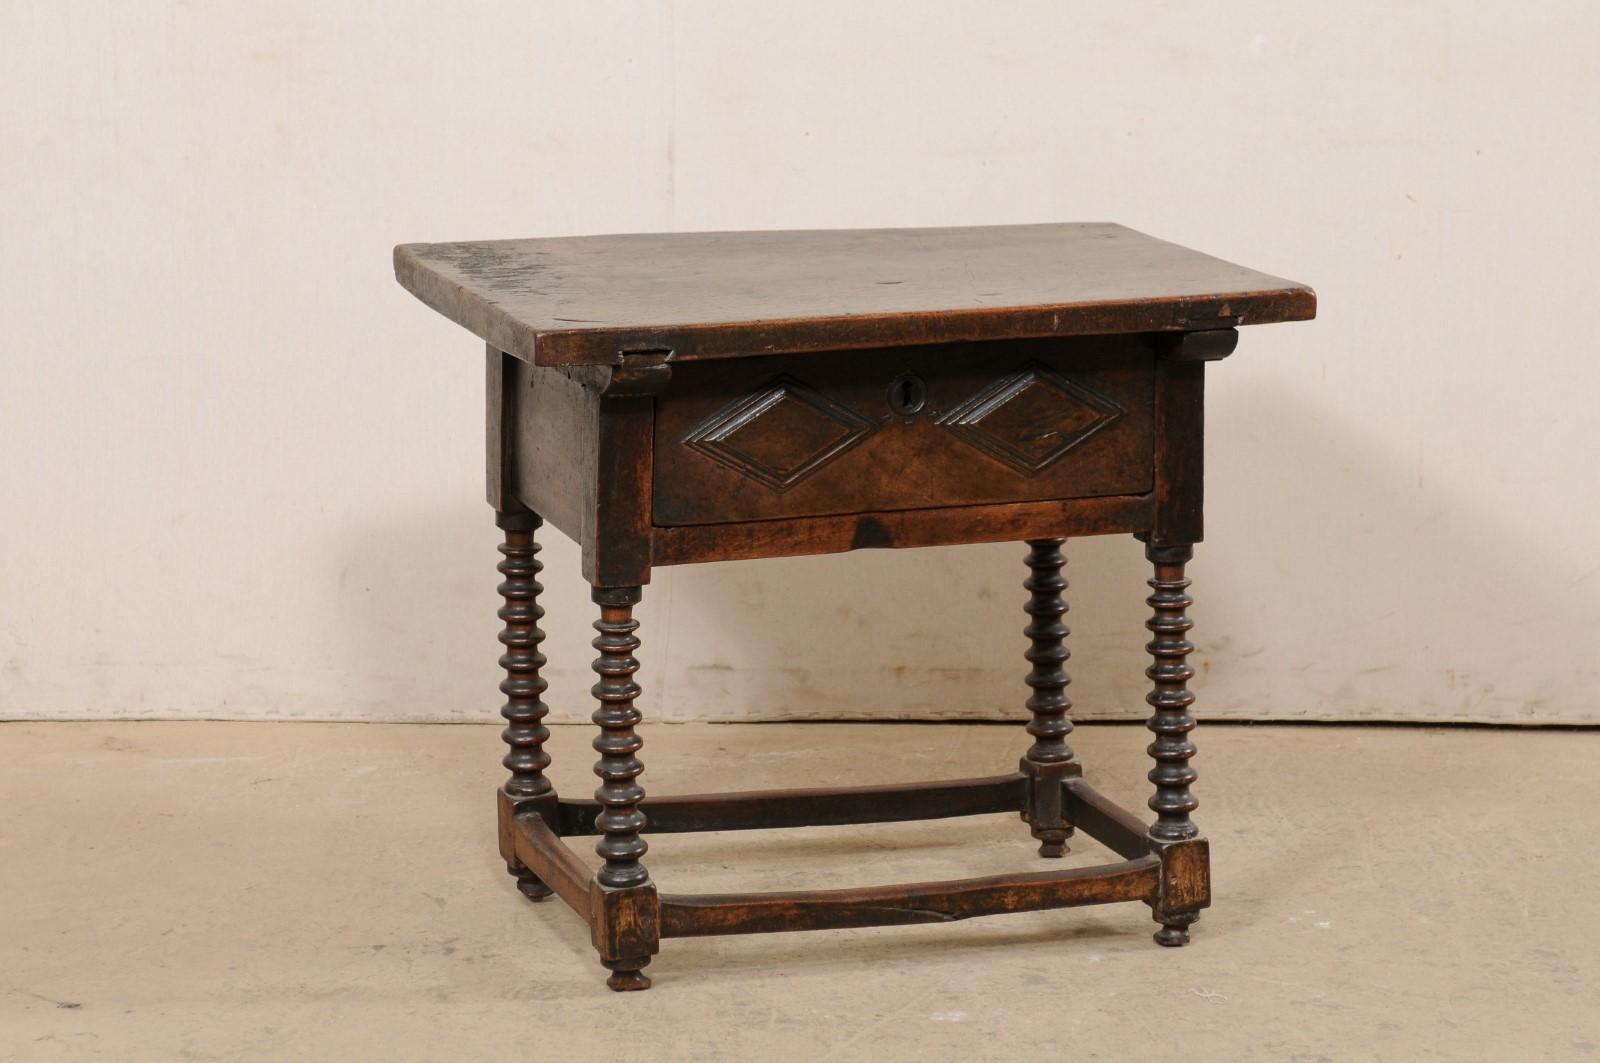 An Italian carved-walnut wood occasional table with single drawer, from the 18th century. This antique table from Italy, created from rich walnut wood, has a rectangular-shaped top, which overhangs the apron below which houses a single drawer at one